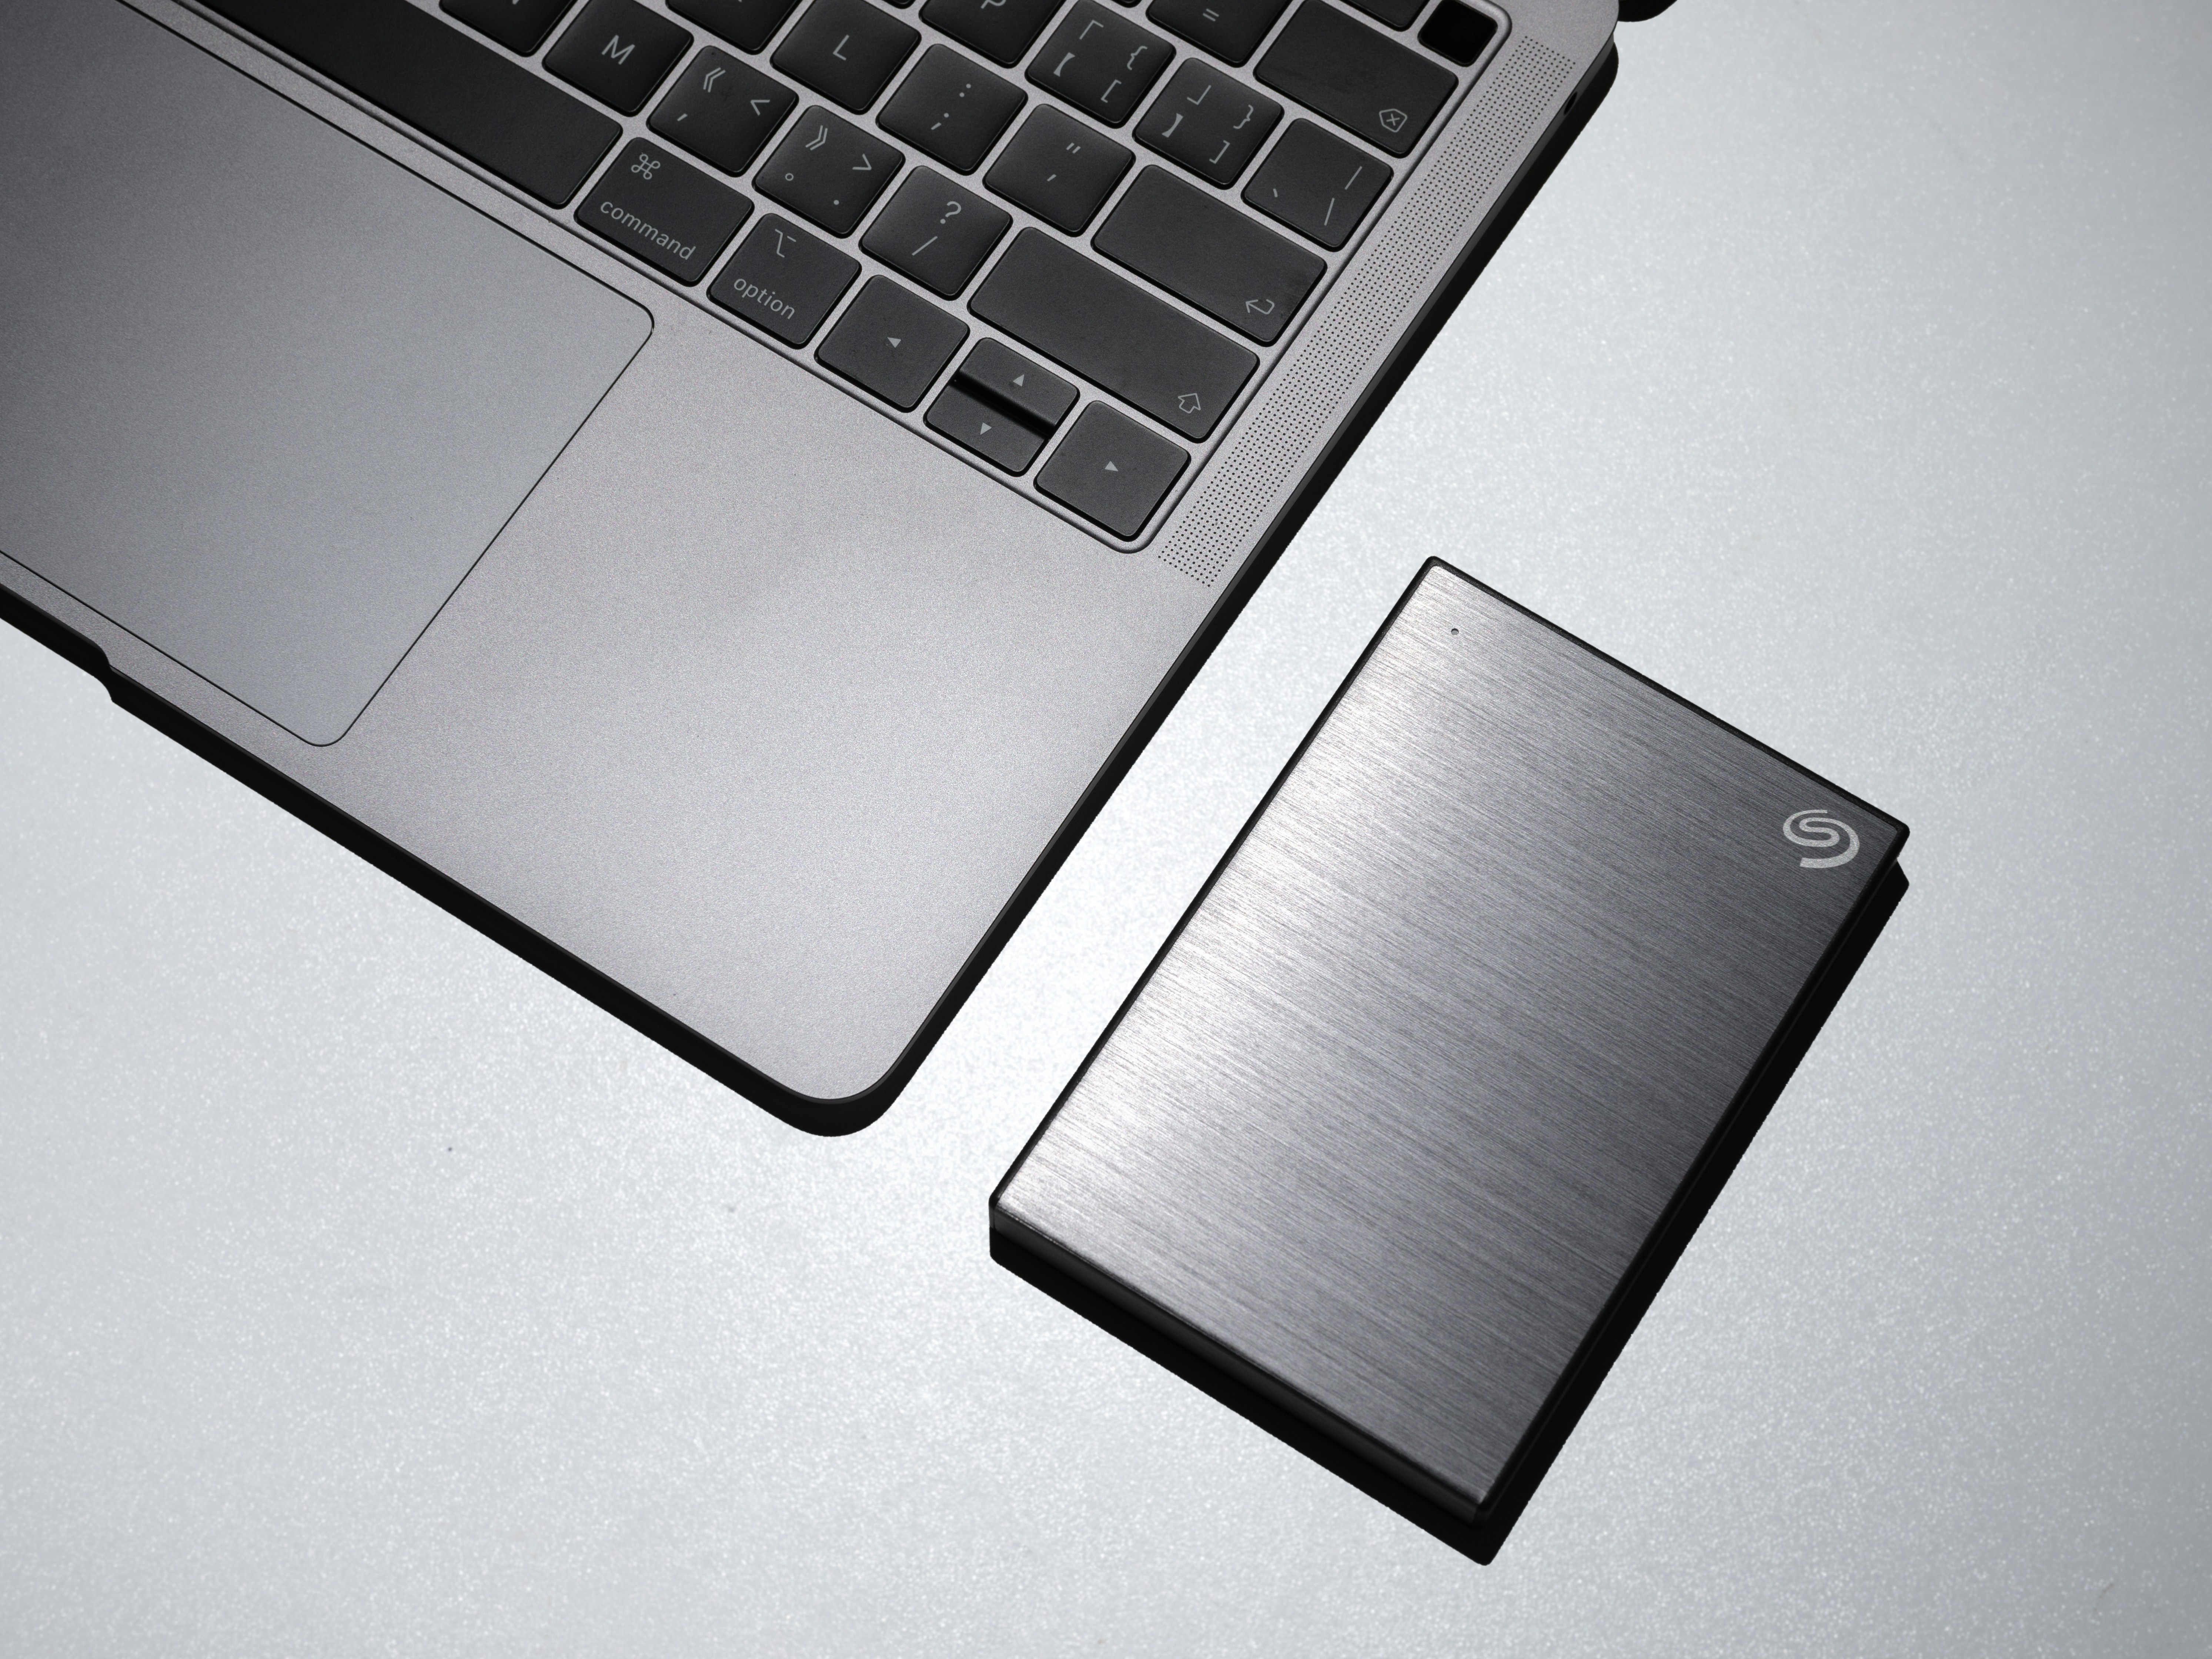 Breathe New Life into Your Old PC with a Solid State Drive!